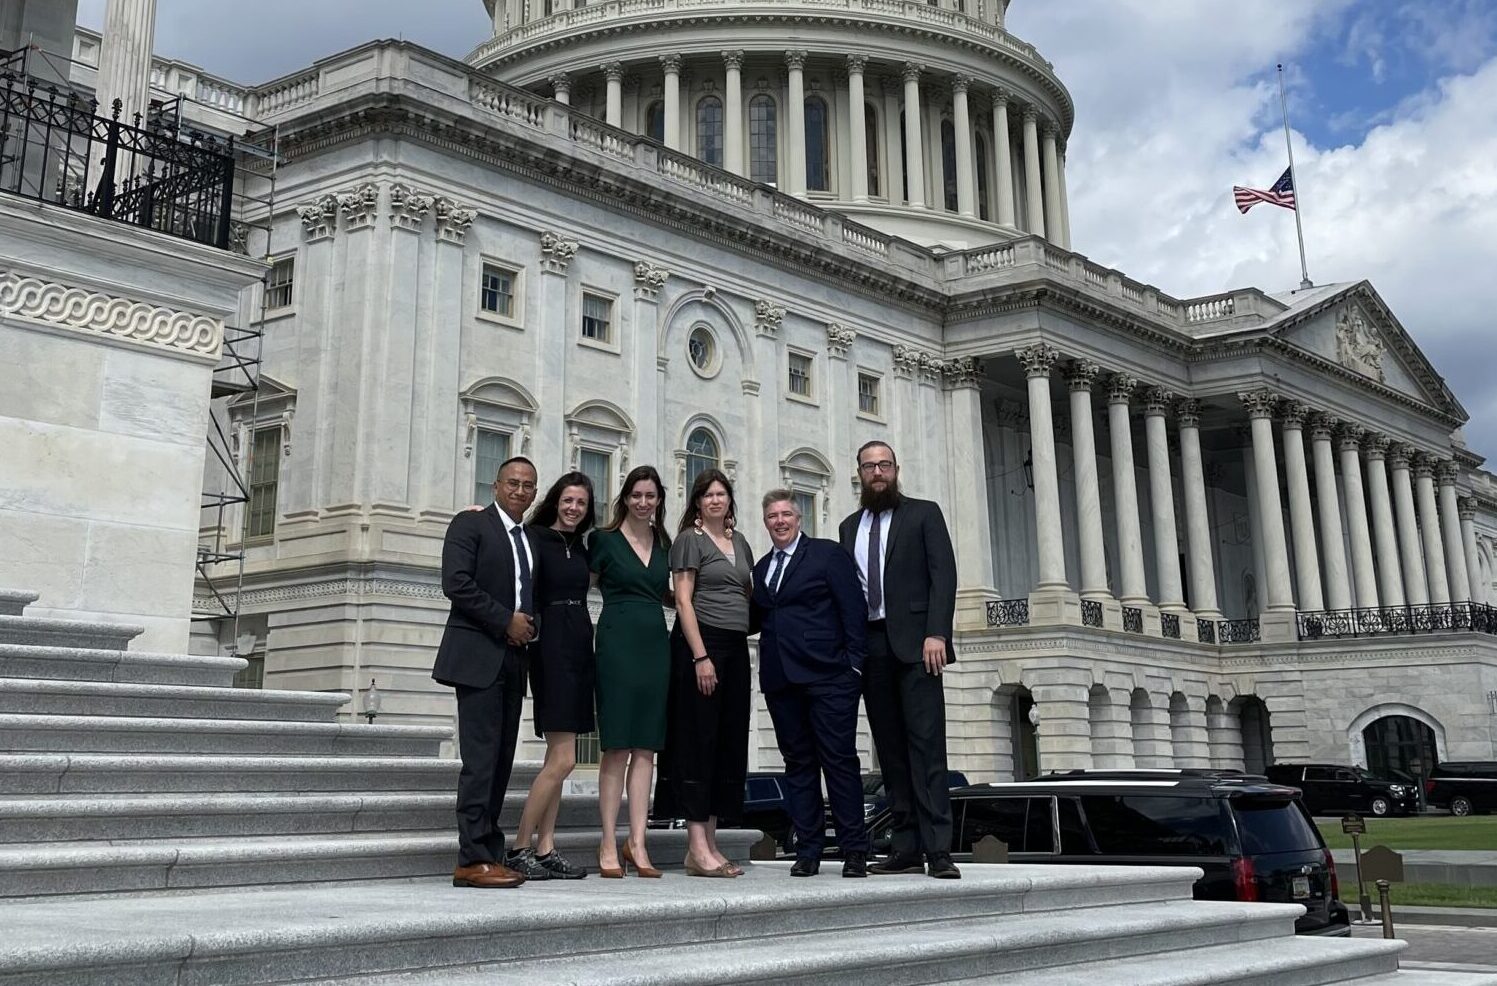 Addiction Policy Scholars on the steps of the U.S. Capitol